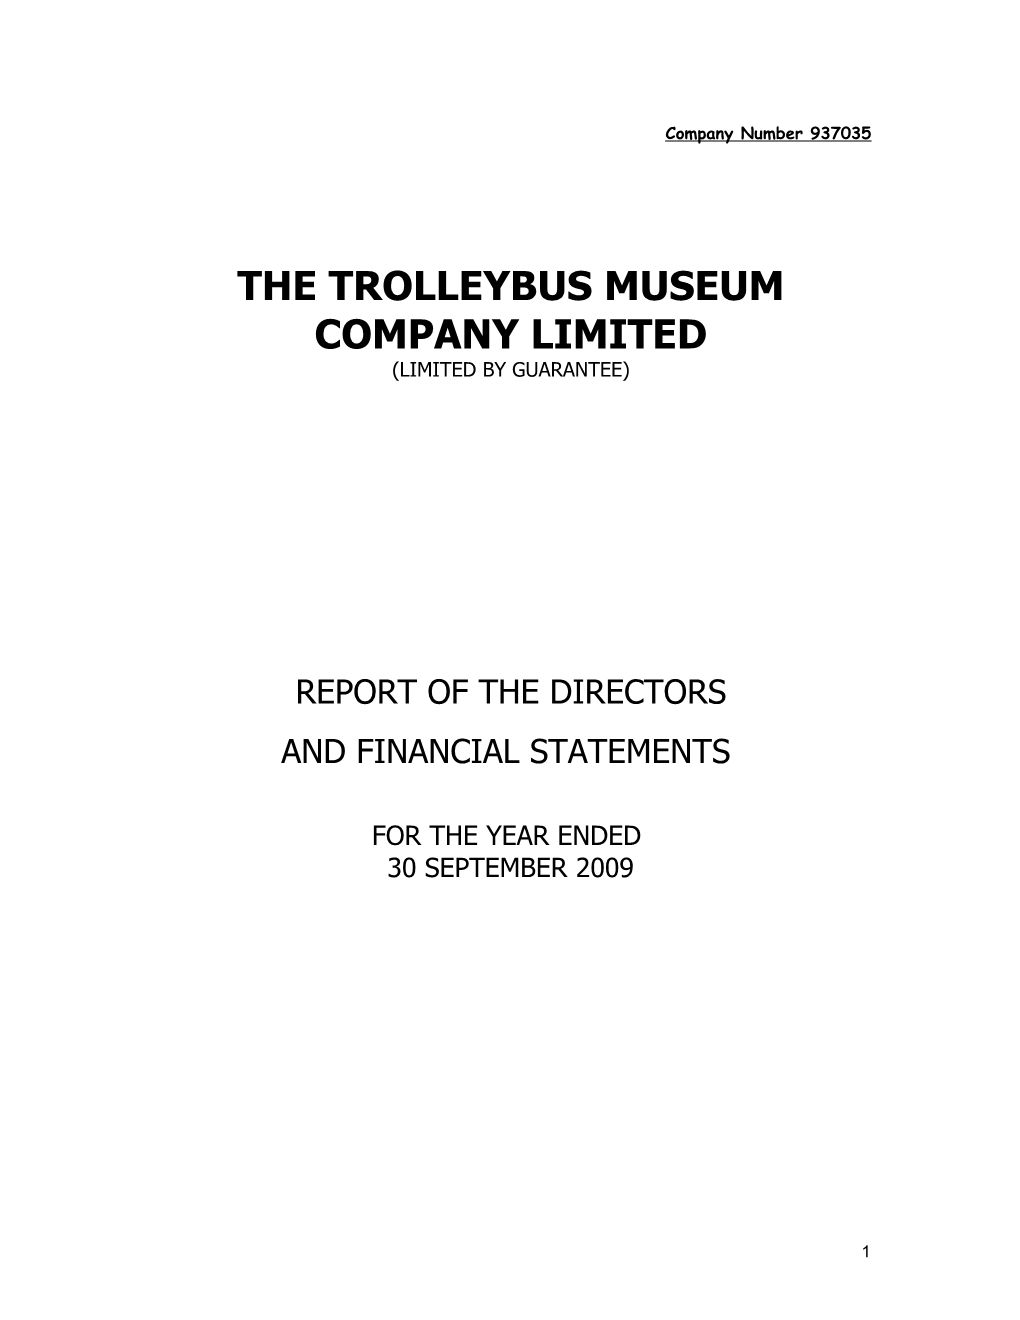 The Trolleybus Museum Company Limited